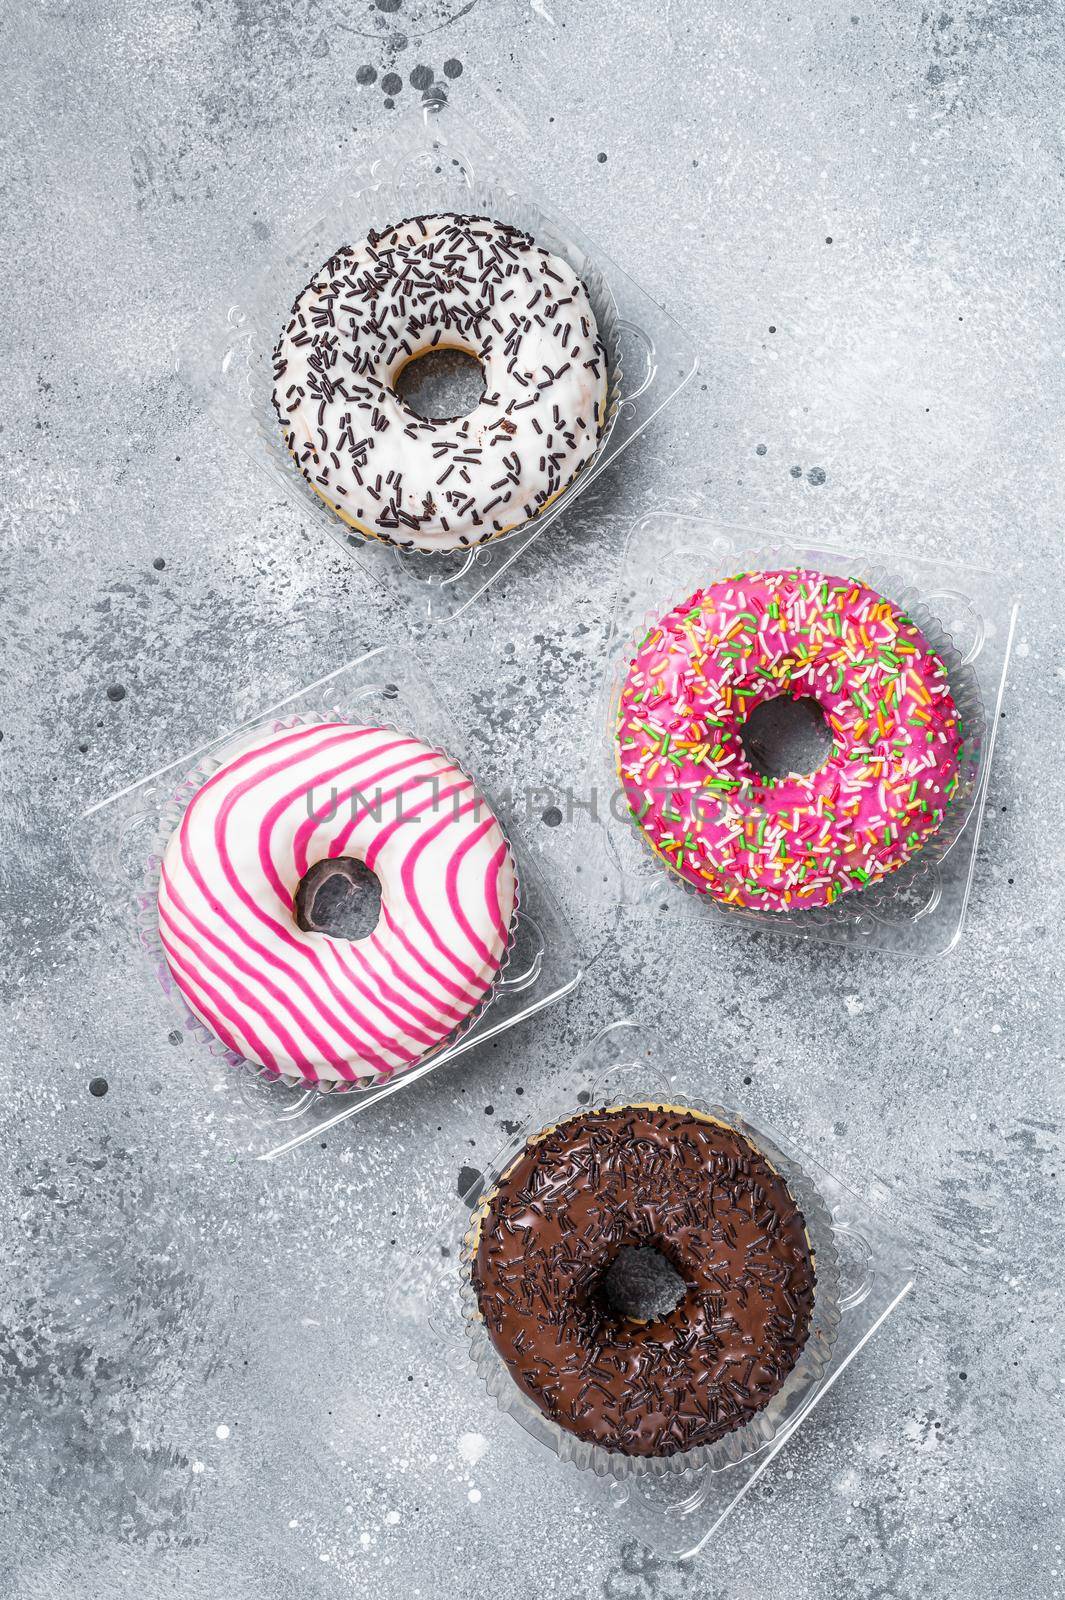 Assorted glazed donuts on a kitchen table. Gray background. Top view.